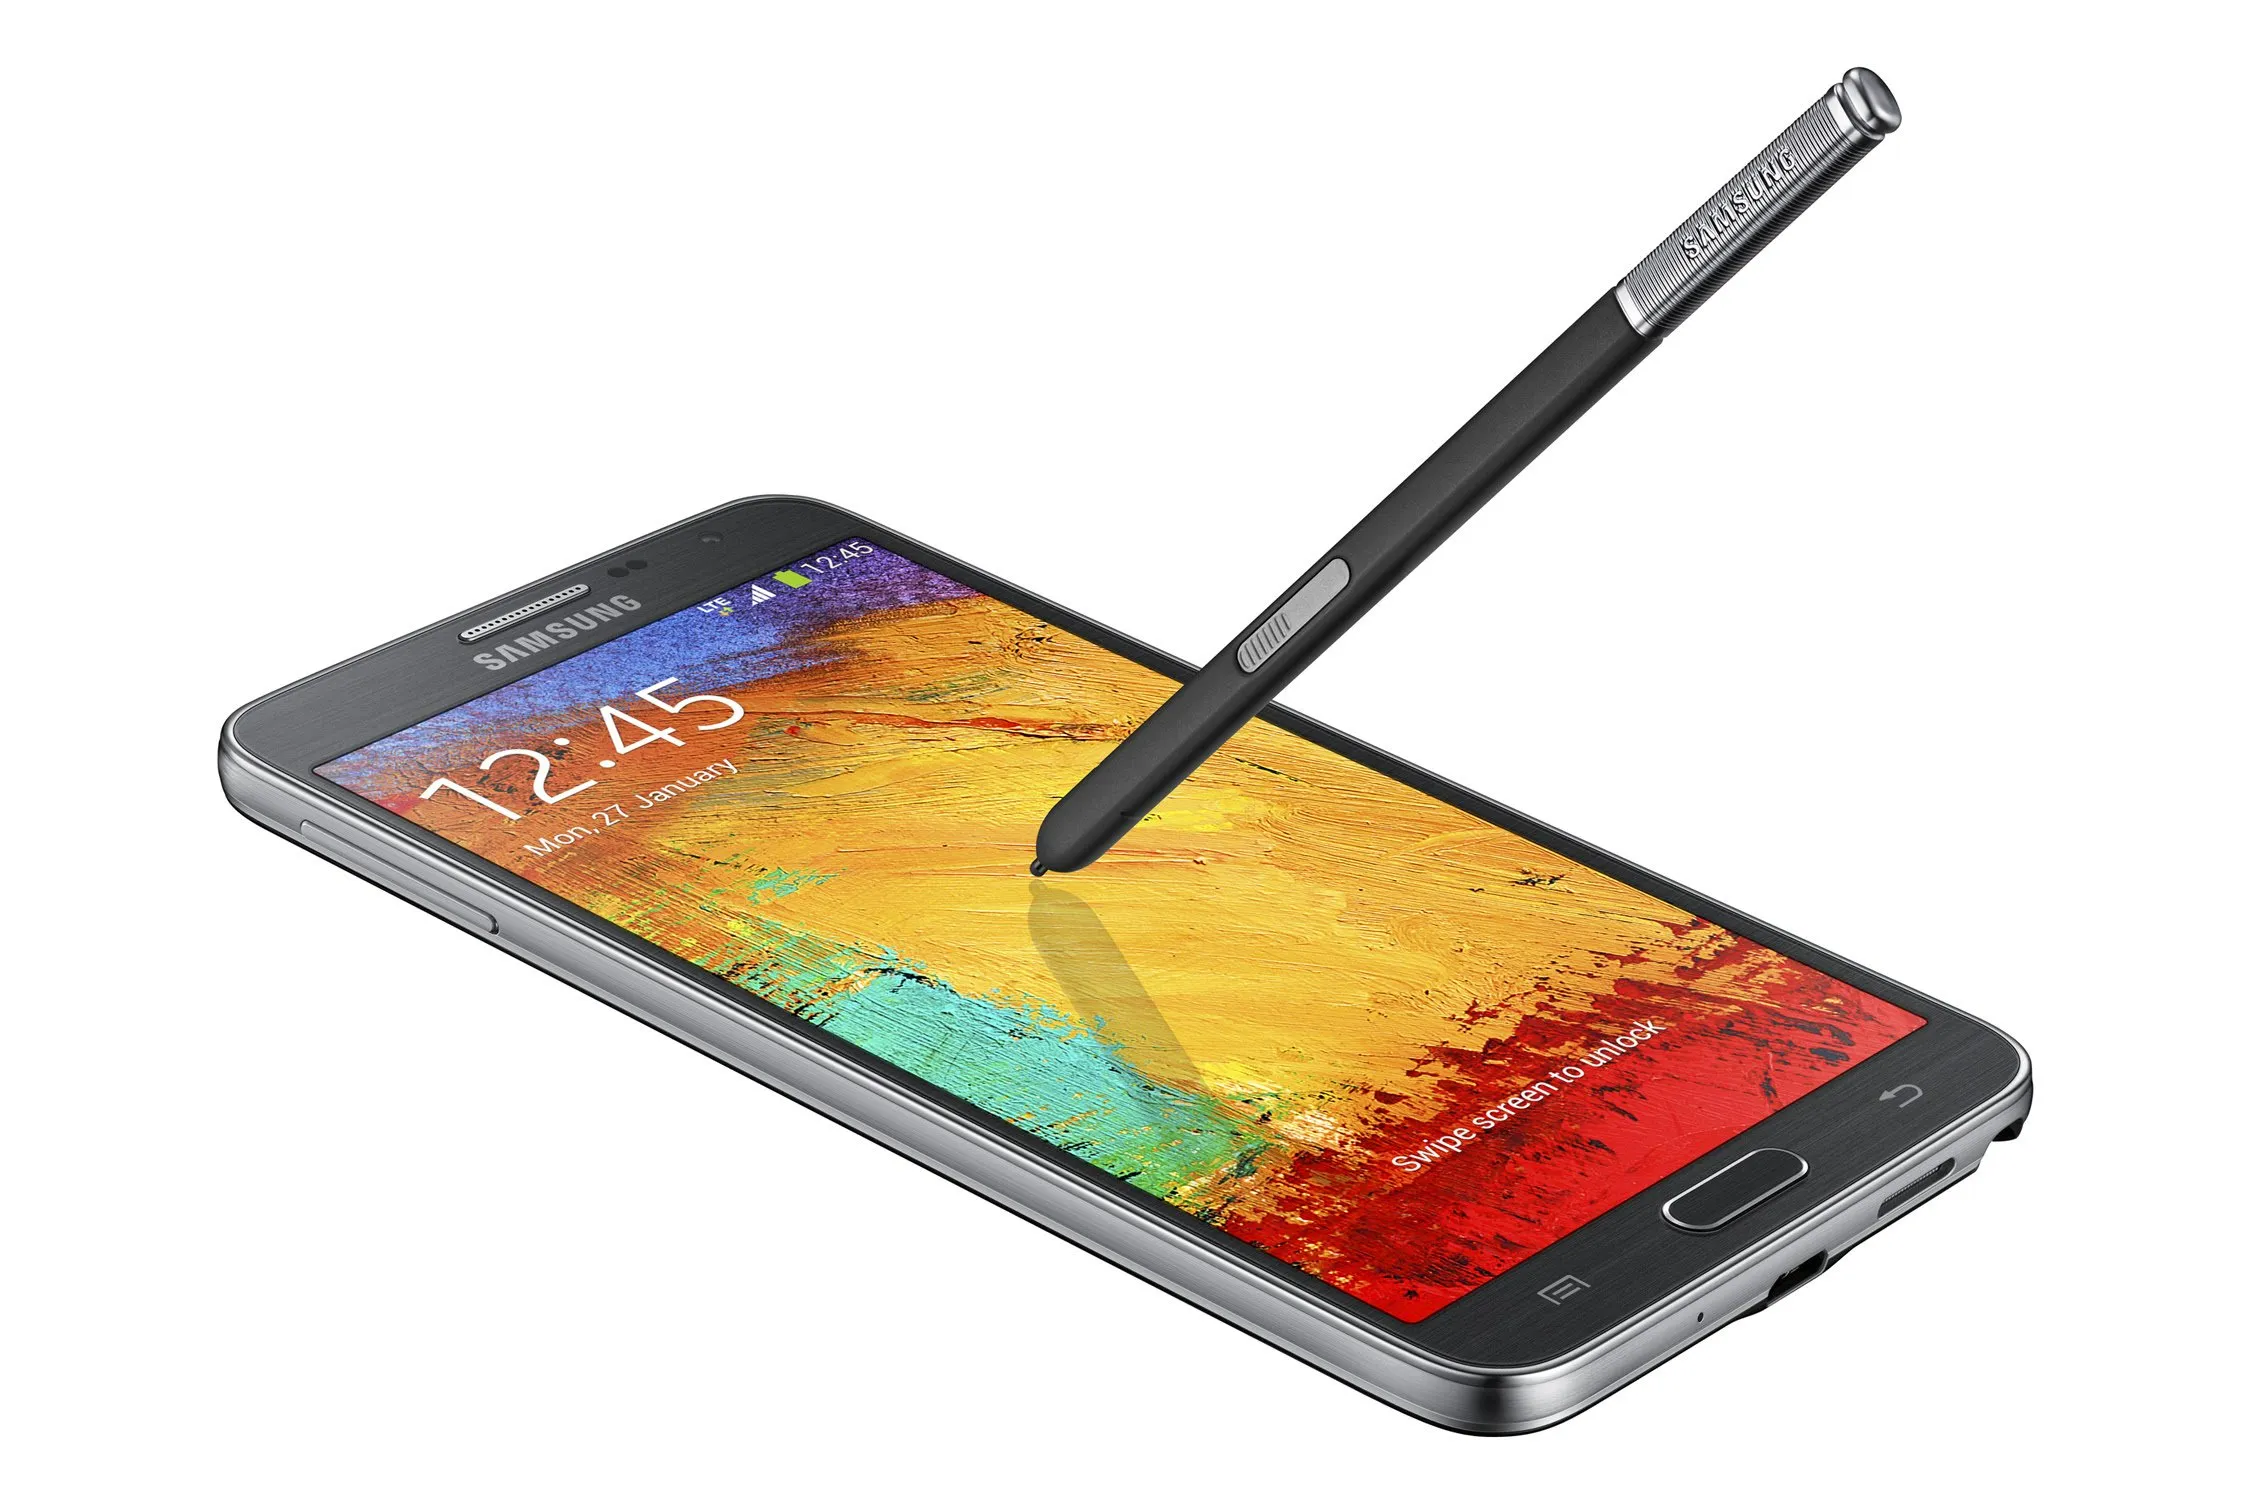 [Troubleshooting Guide] What to do if your Samsung Galaxy Note 3 Neo continues rebooting on its own after the rooting method